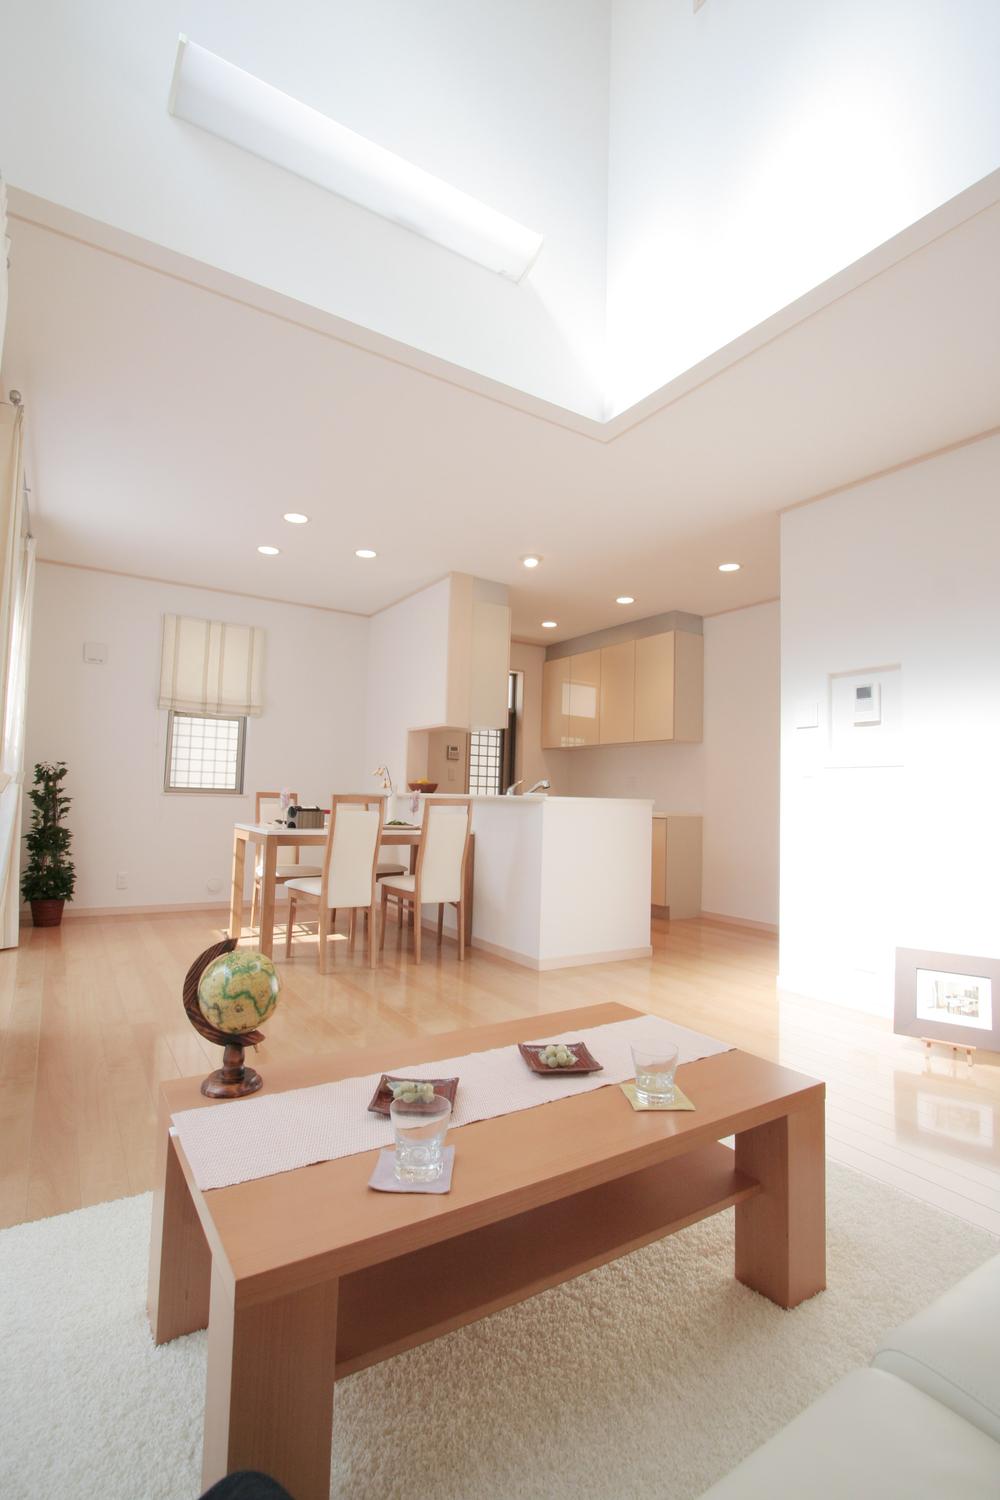 Of bright atmosphere living (sale completed dwelling unit). Of bright atmosphere living